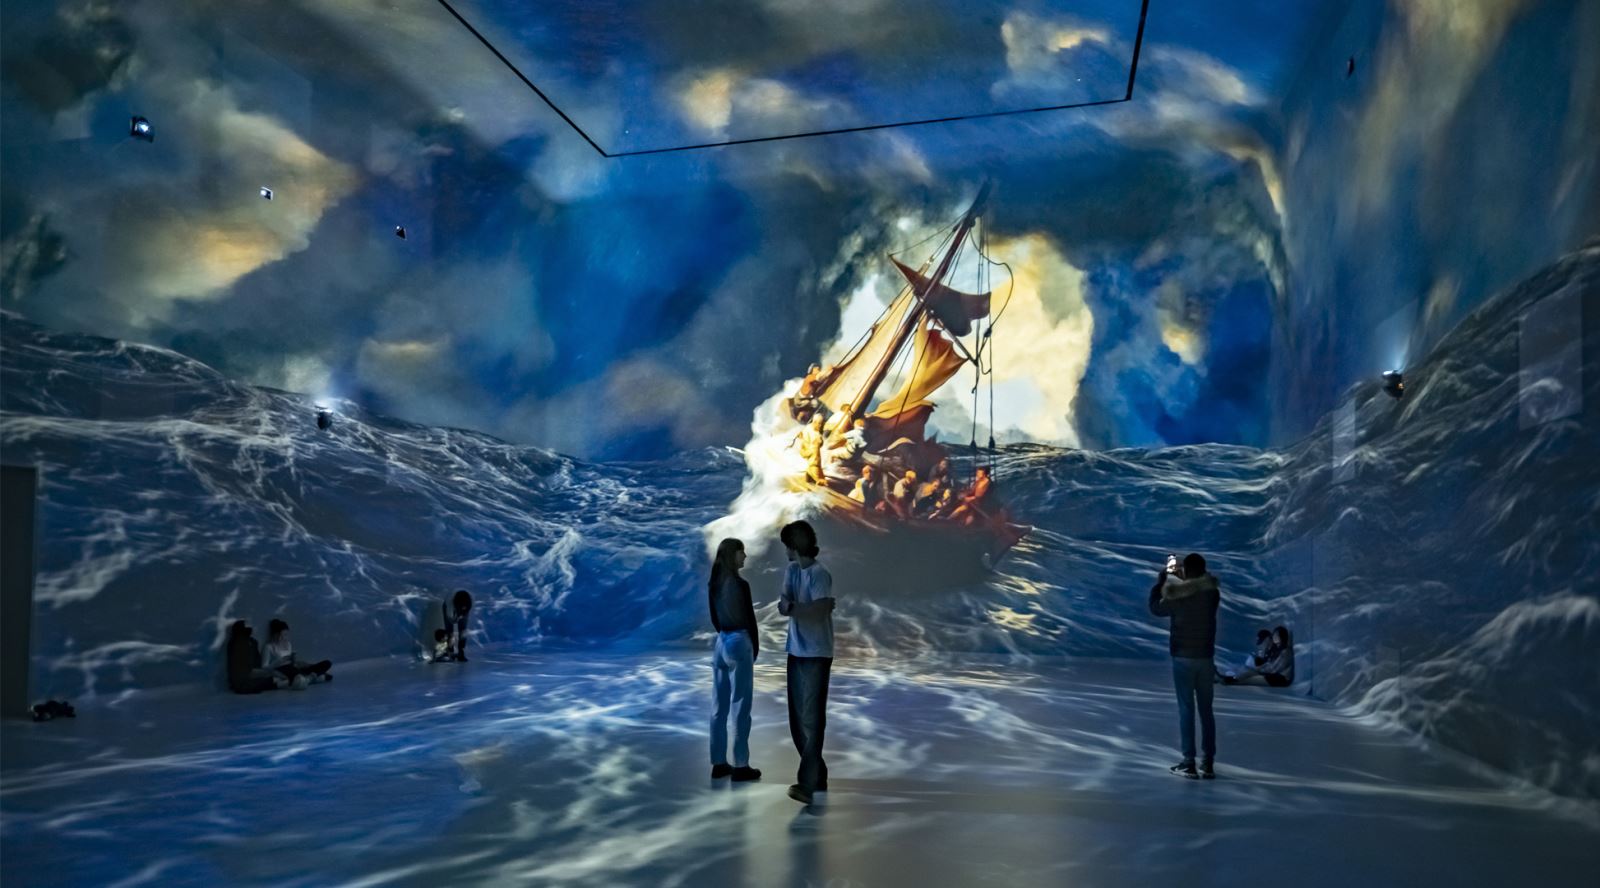 Panasonic projectors help frameless - The UK's largest immersive attraction